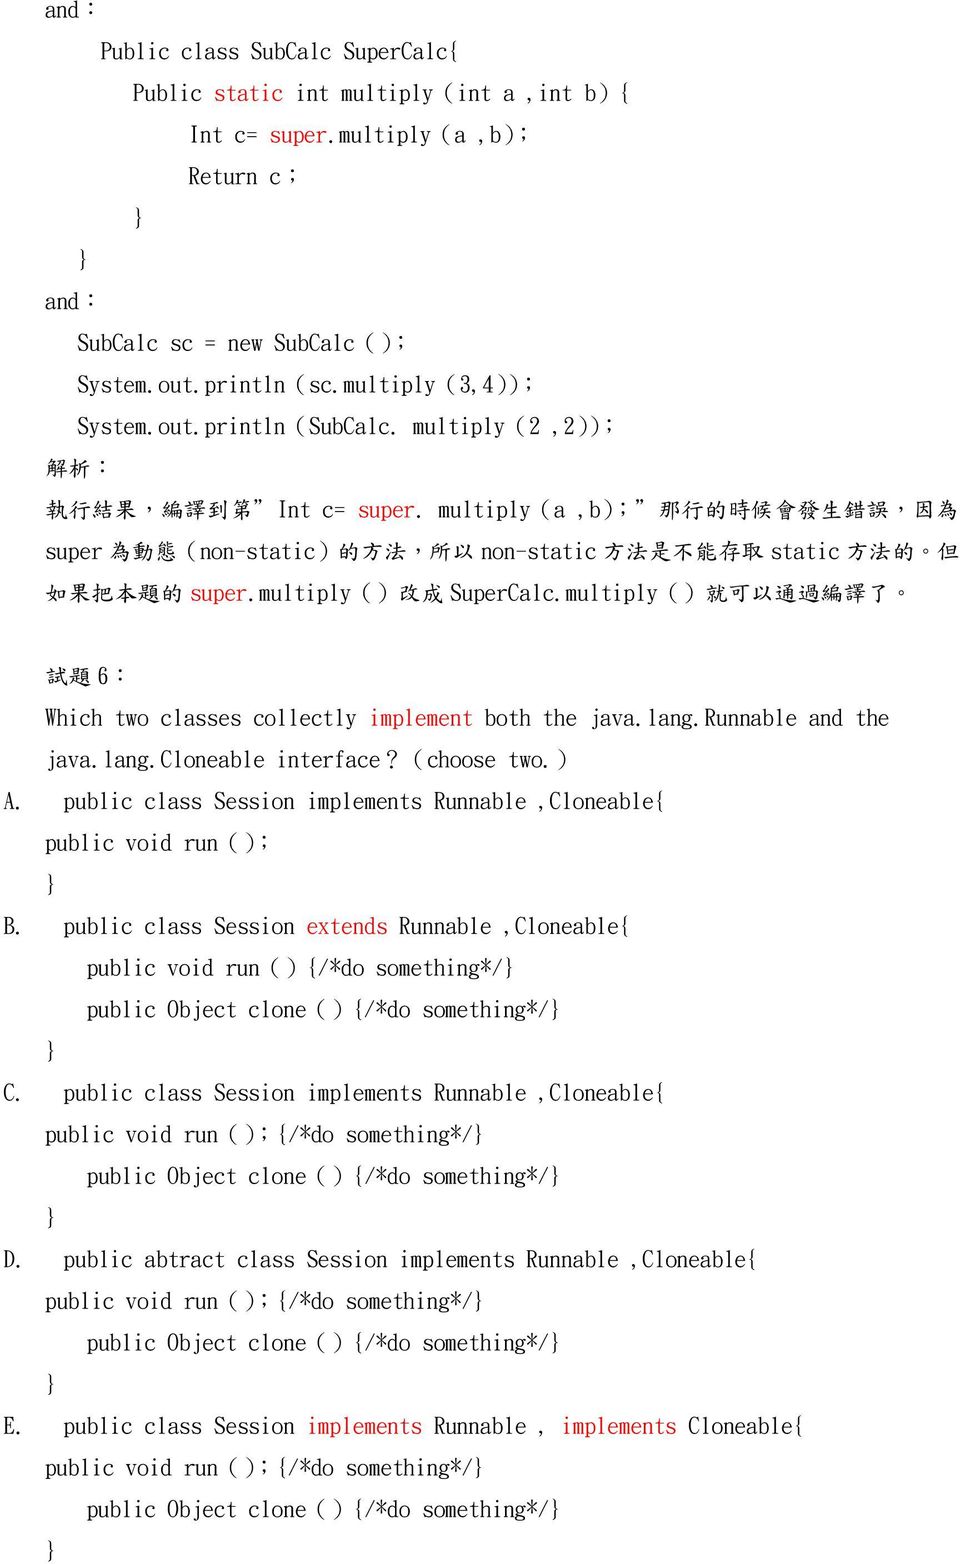 multiply() 改 成 SuperCalc.multiply() 就 可 以 通 過 編 譯 了 試 題 6: Which two classes collectly implement both the java.lang.runnable and the java.lang.cloneable interface?(choose two.) A.